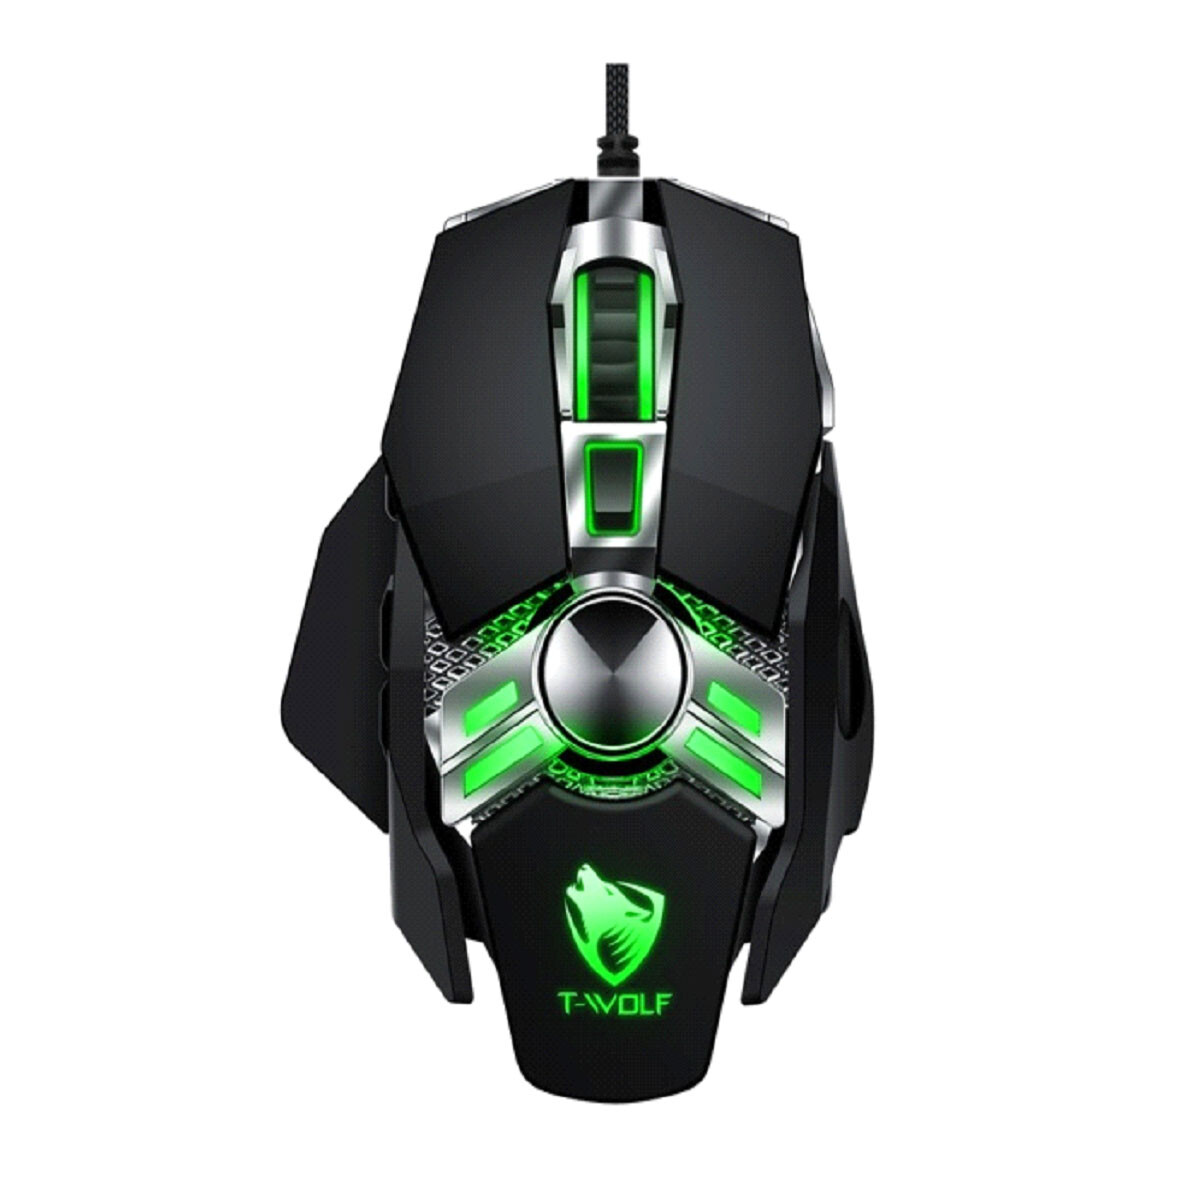 MOUSE GAMER CON CABLE TWOLF - V10BK - NEGRO 